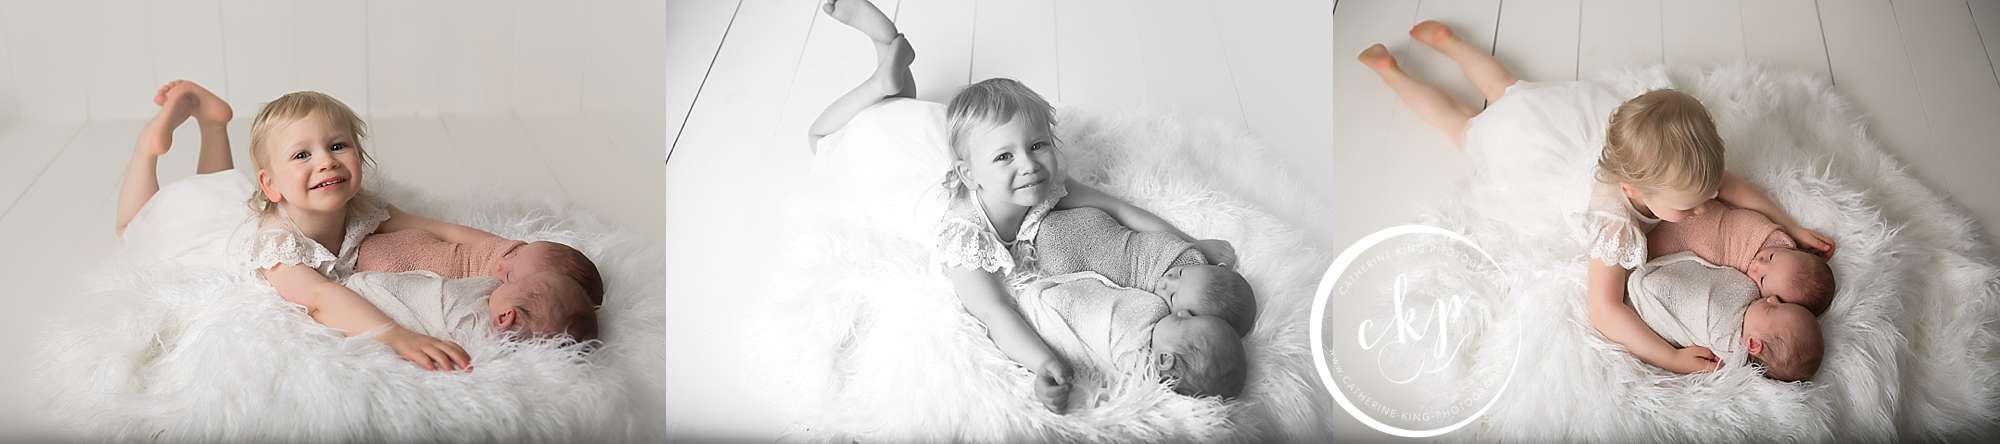 Newborn baby girl twin photography session with CKP a madison ct newborn photography